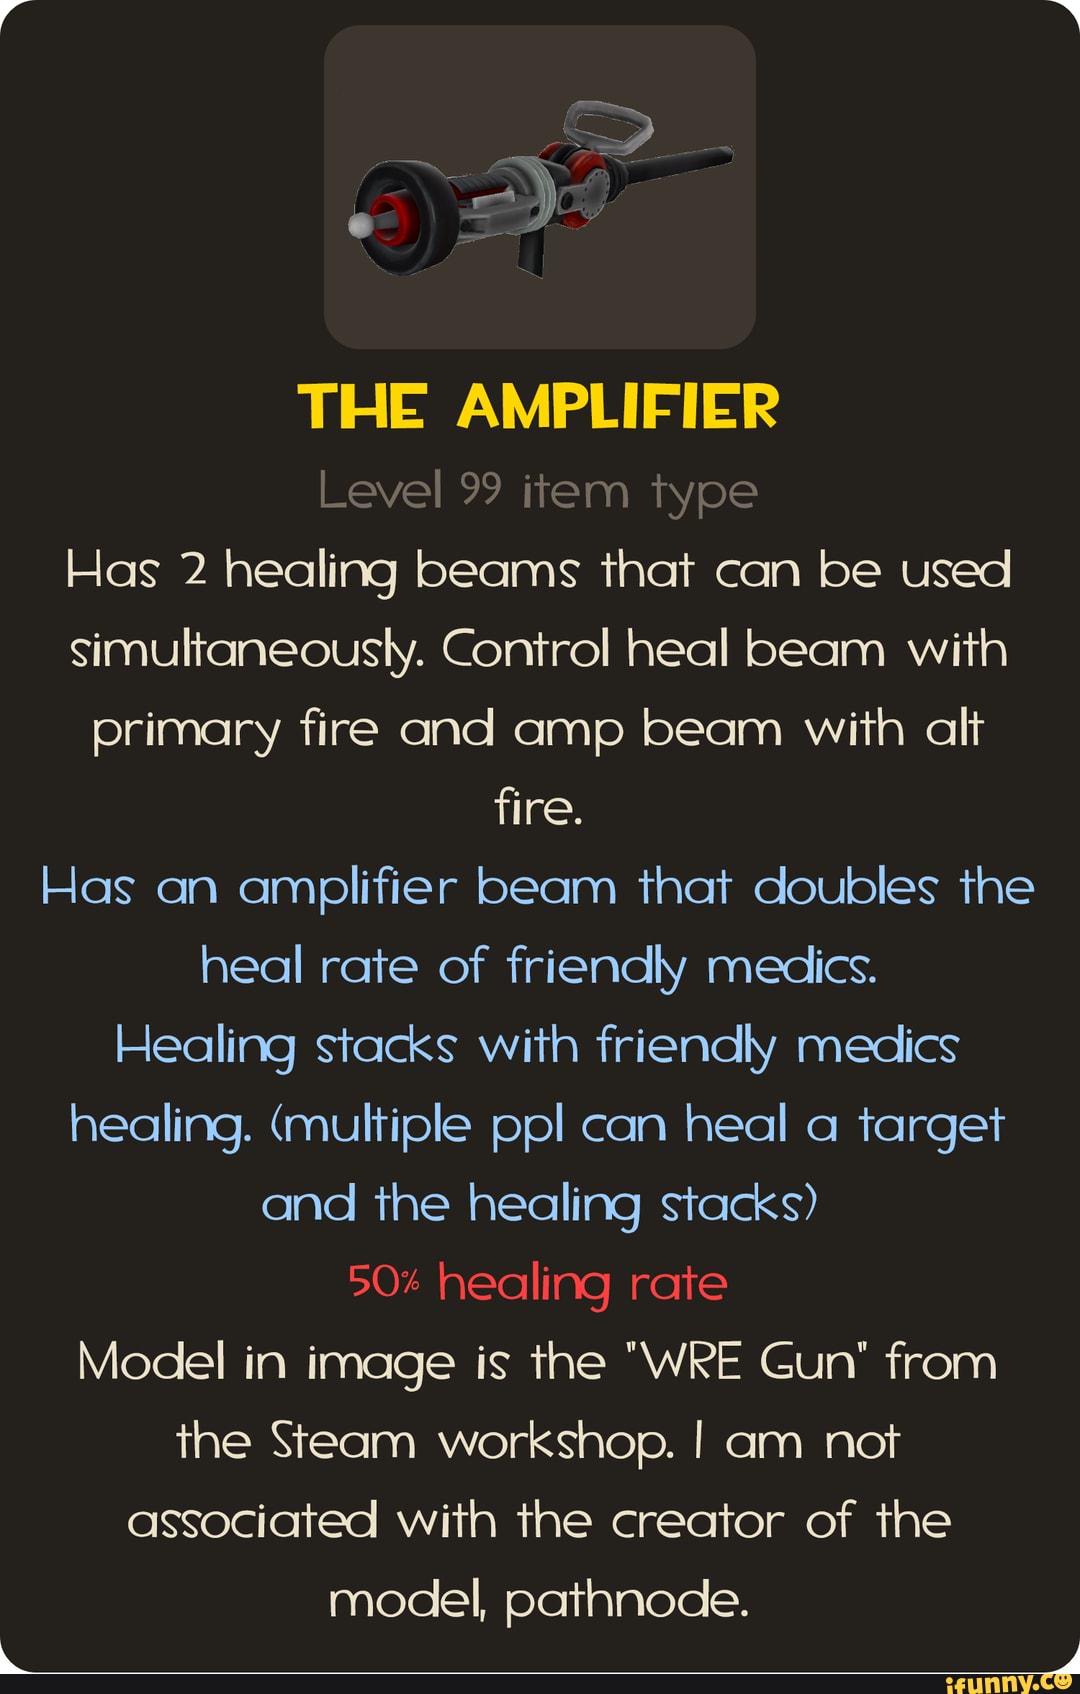 THE AMPLIFIER Level 99 item type Has 2 healing beams that can be used